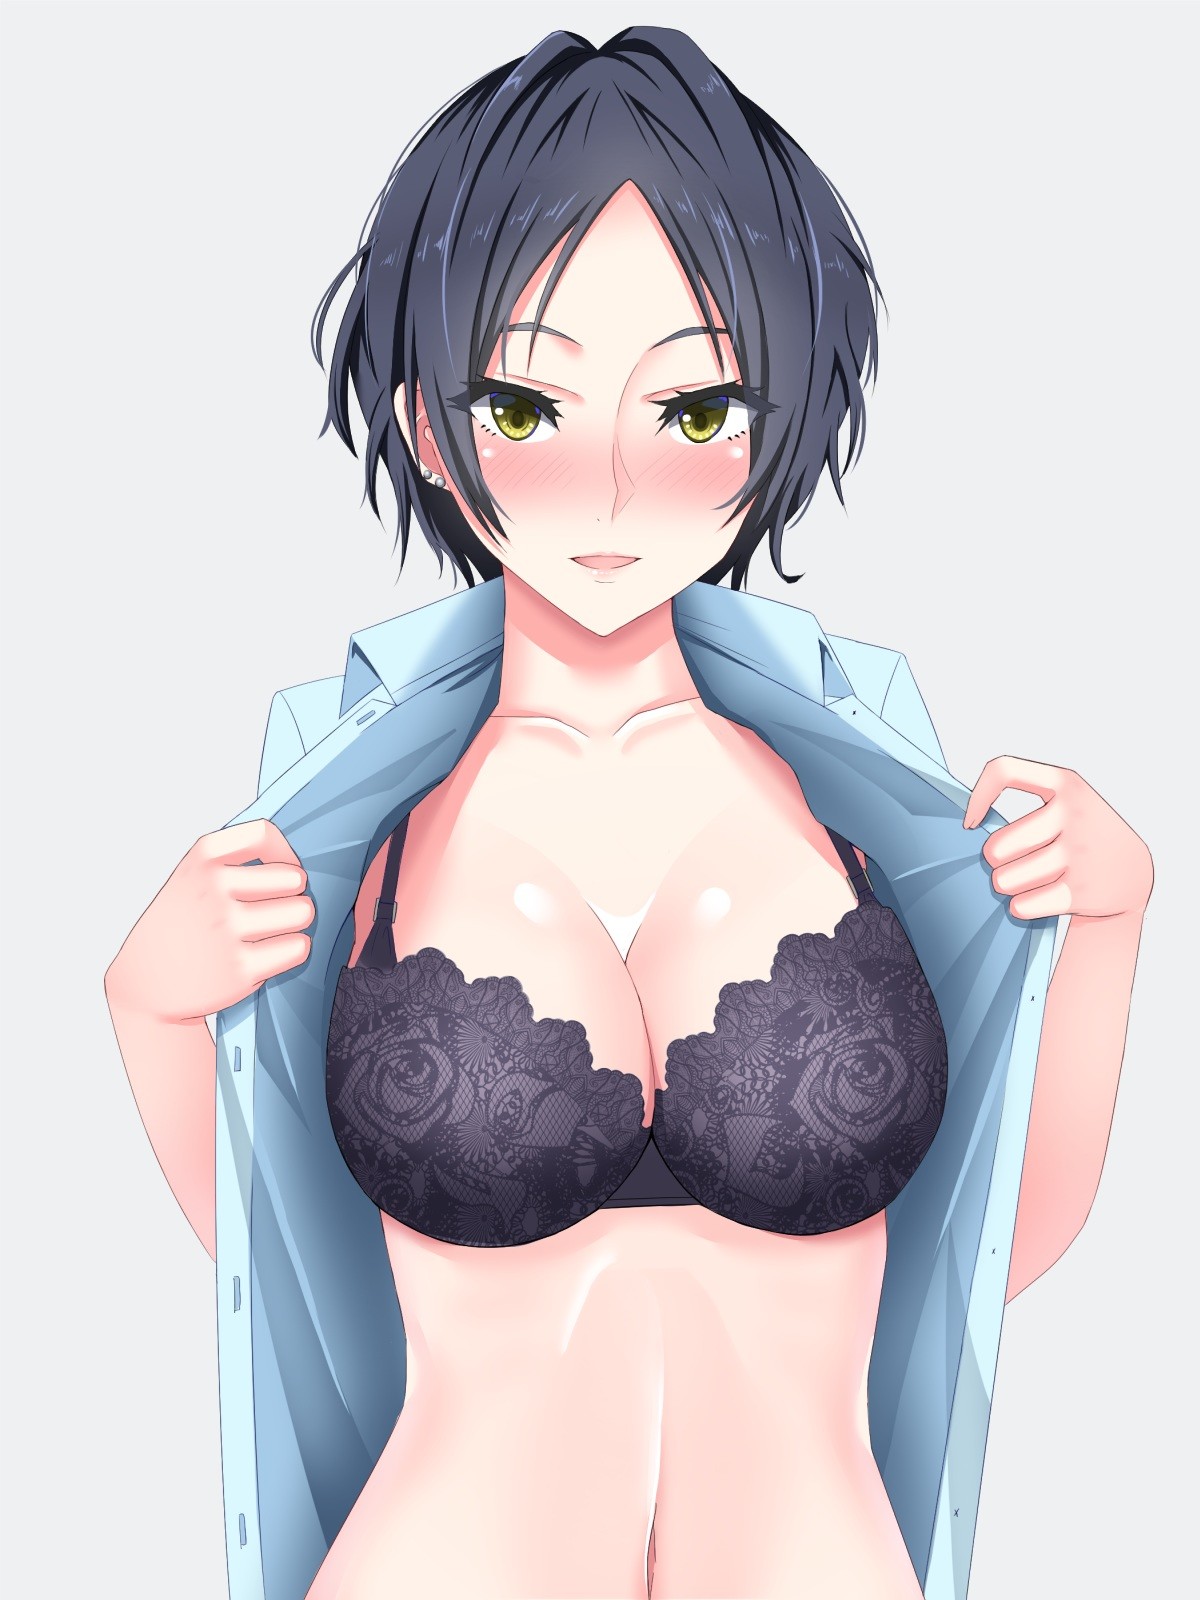 Anime 1200x1600 anime anime girls THE iDOLM@STER THE iDOLM@STER: Cinderella Girls Hayami Kanade bra cleavage open shirt undressing short hair lingerie black lingerie boobs big boobs open clothes women Pixiv